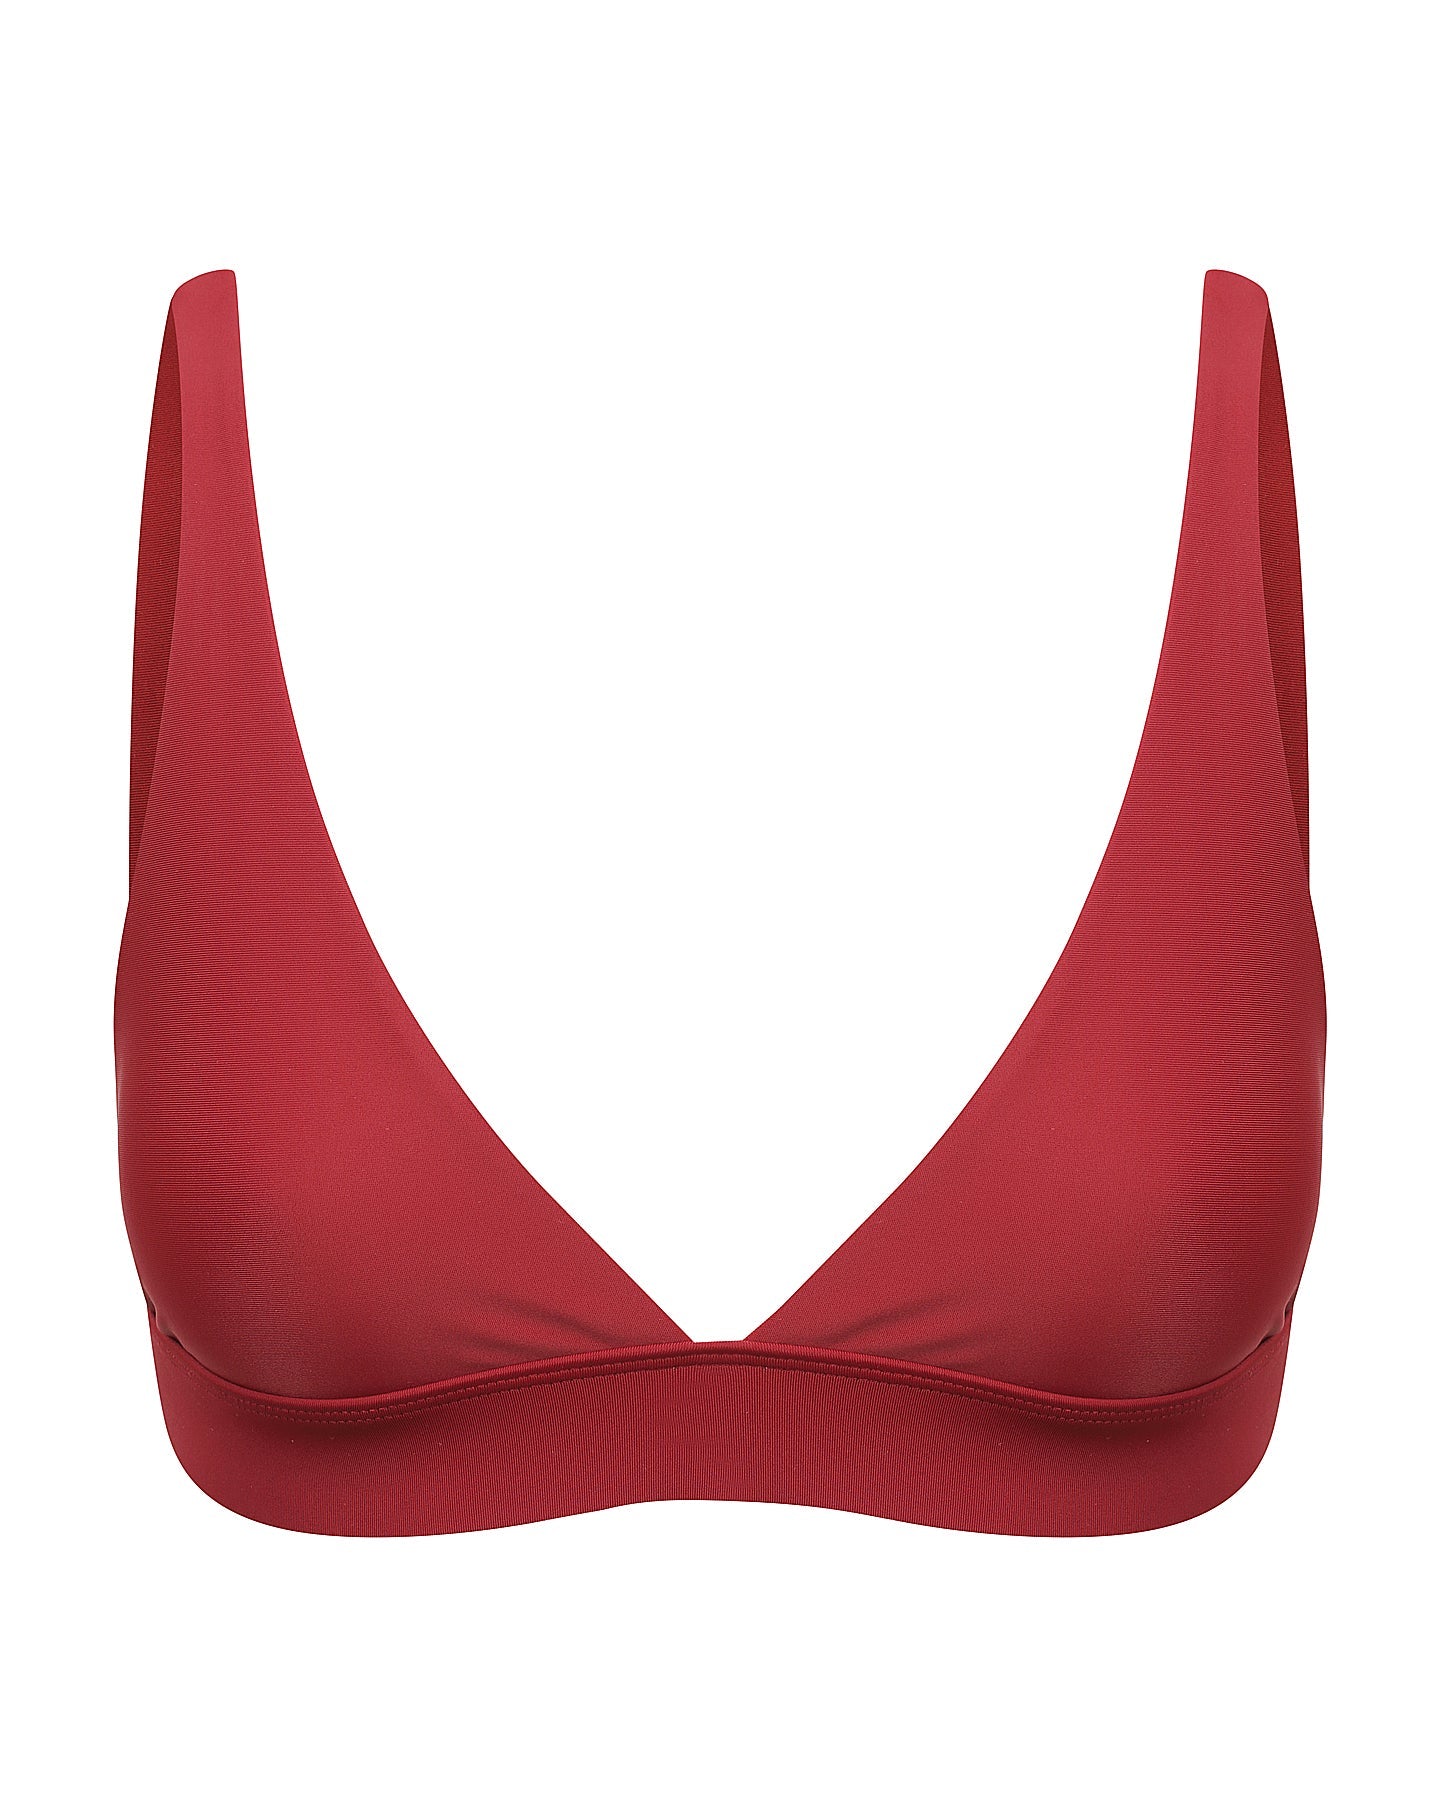 ChileRed Pomegranate Triangle Top